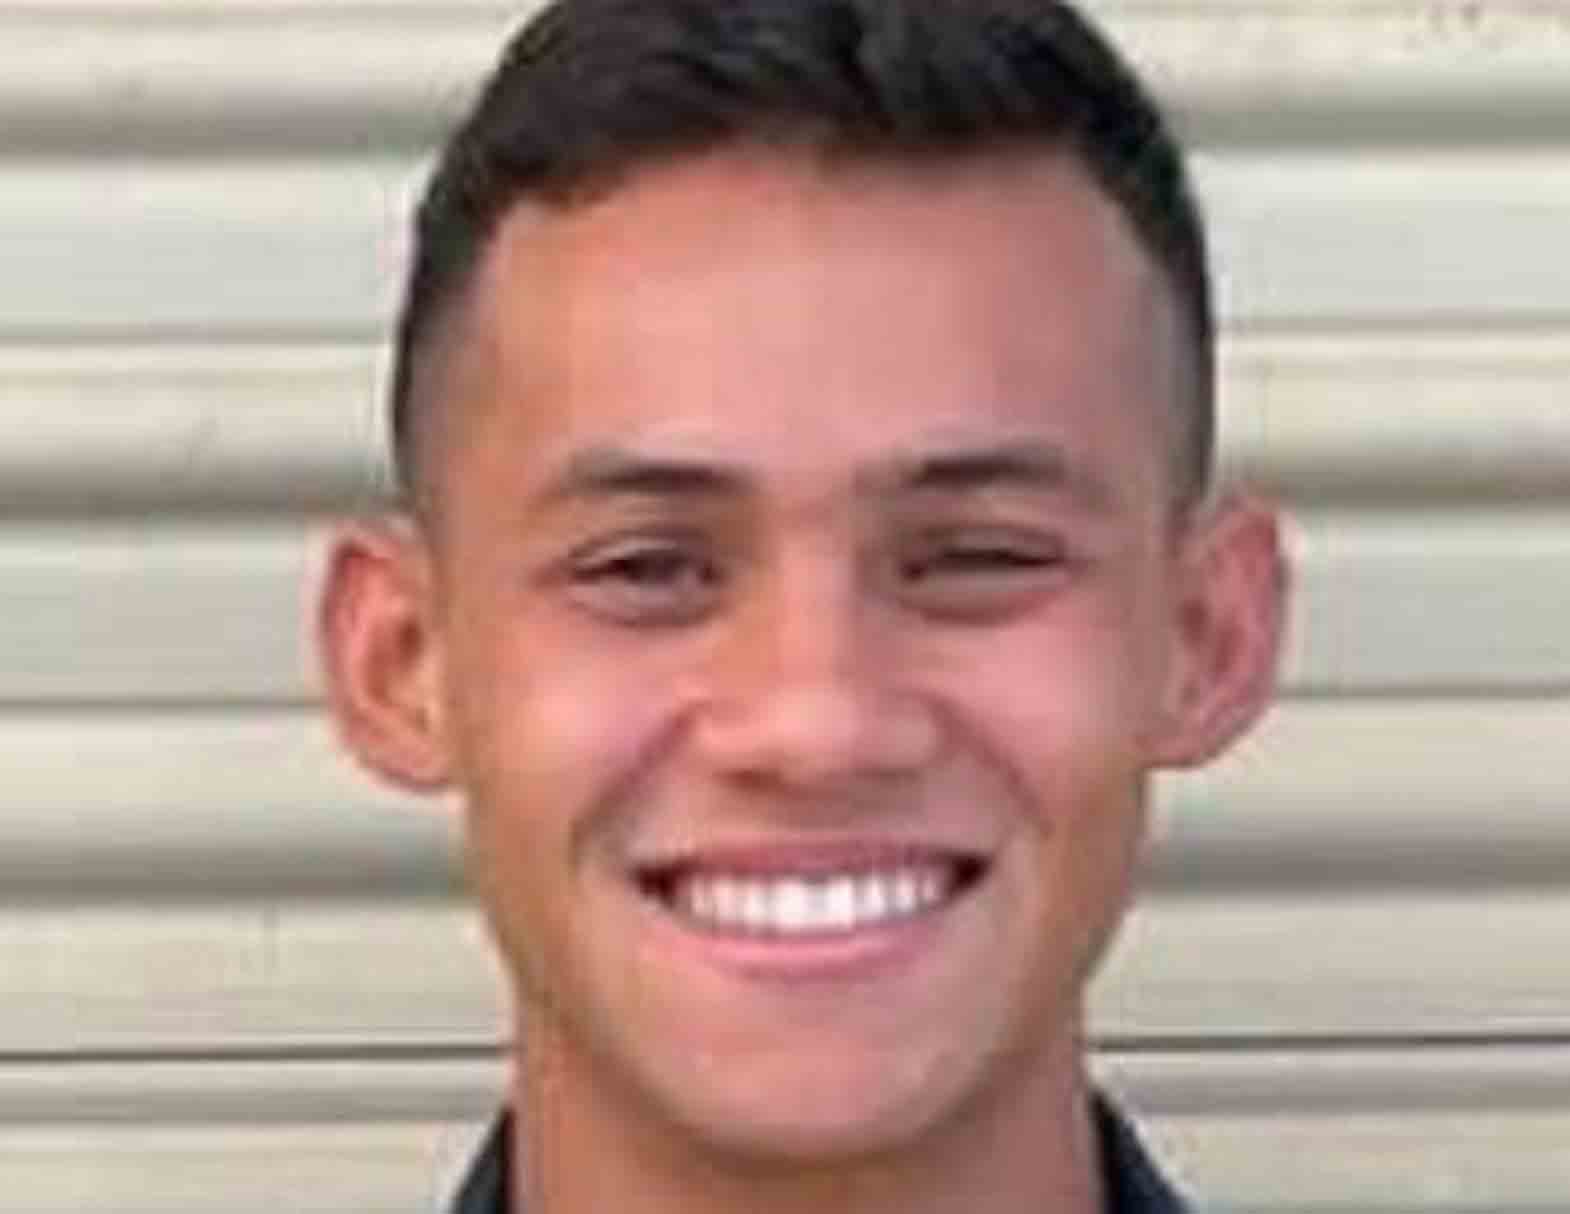 Hawaii firefighter sucked into storm drain still fighting for his life